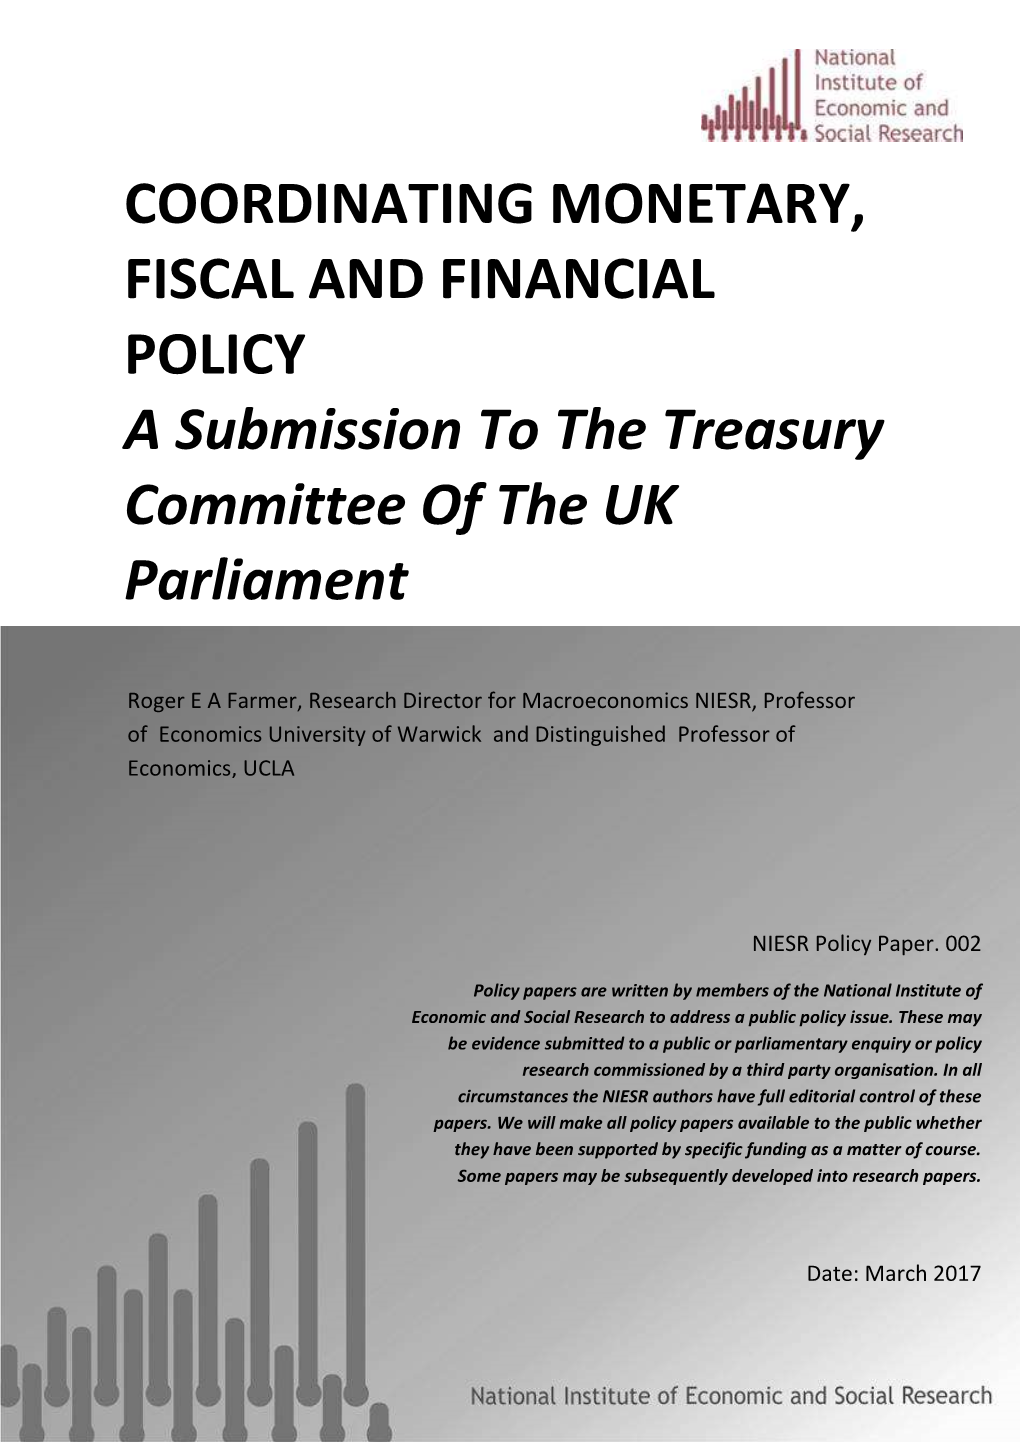 COORDINATING MONETARY, FISCAL and FINANCIAL POLICY a Submission to the Treasury Committee of the UK Parliament